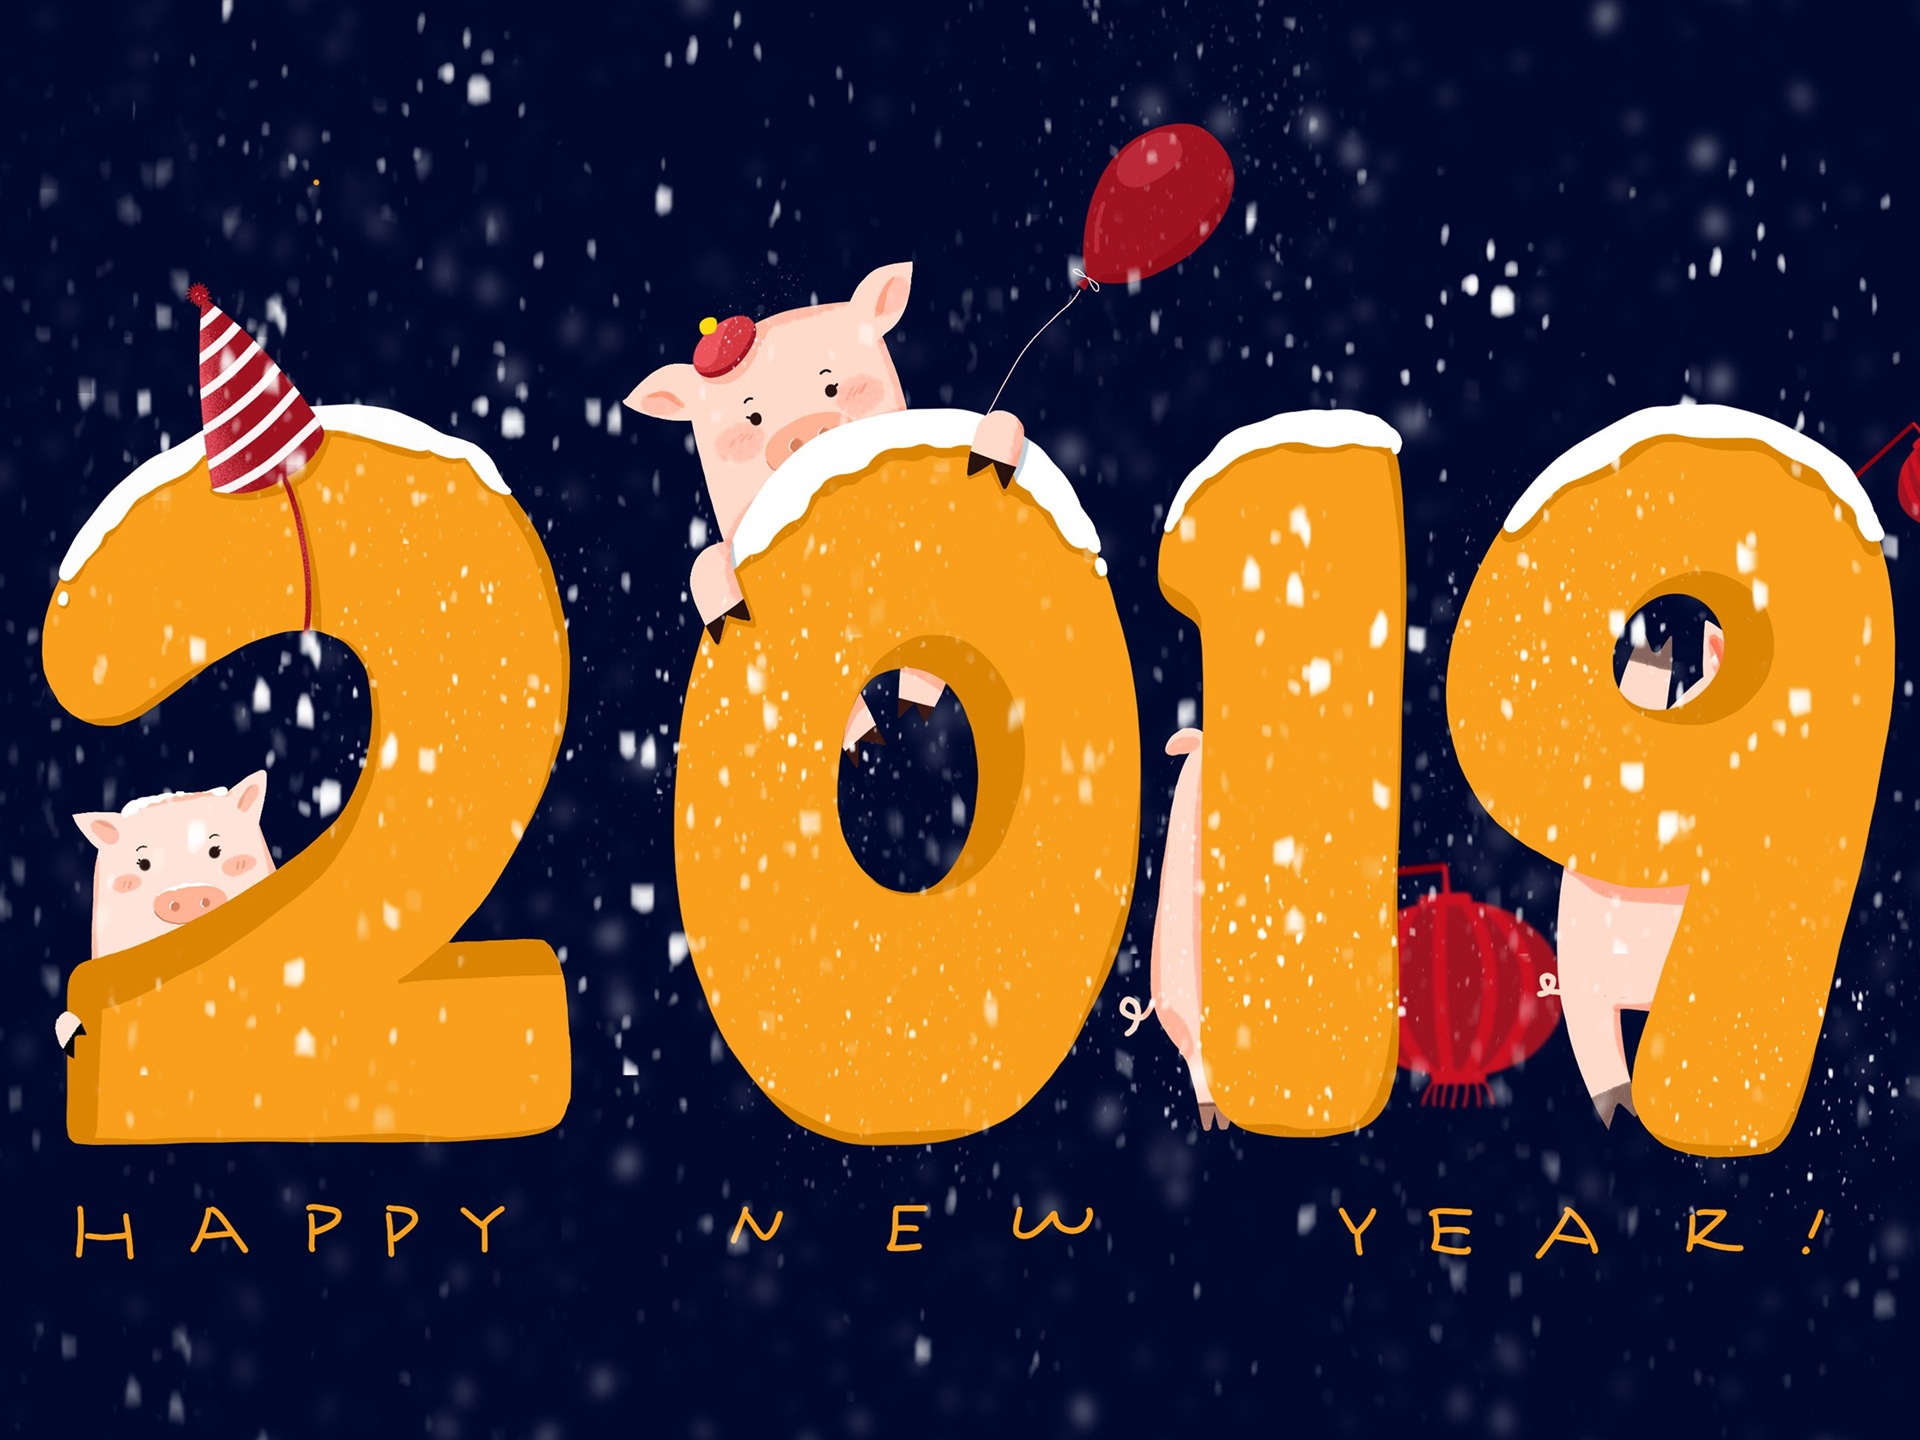 Happy New Year 2019 HD wallpapers #18 - 1920x1440